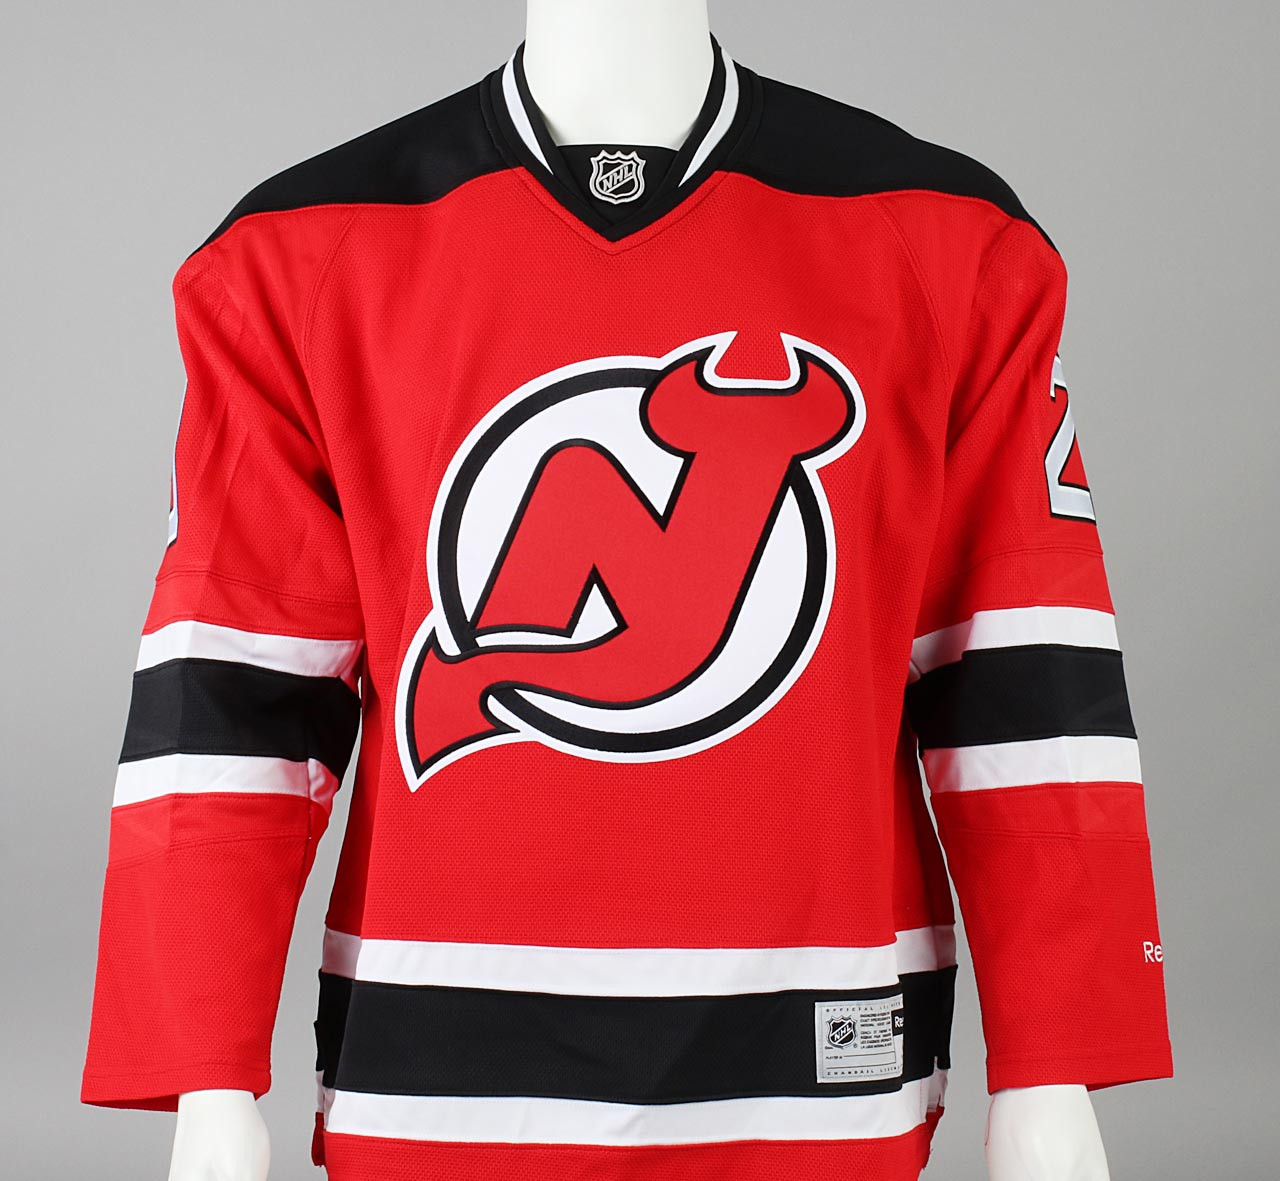 Ranking New Jersey Devils New Jerseys This Season - Page 6